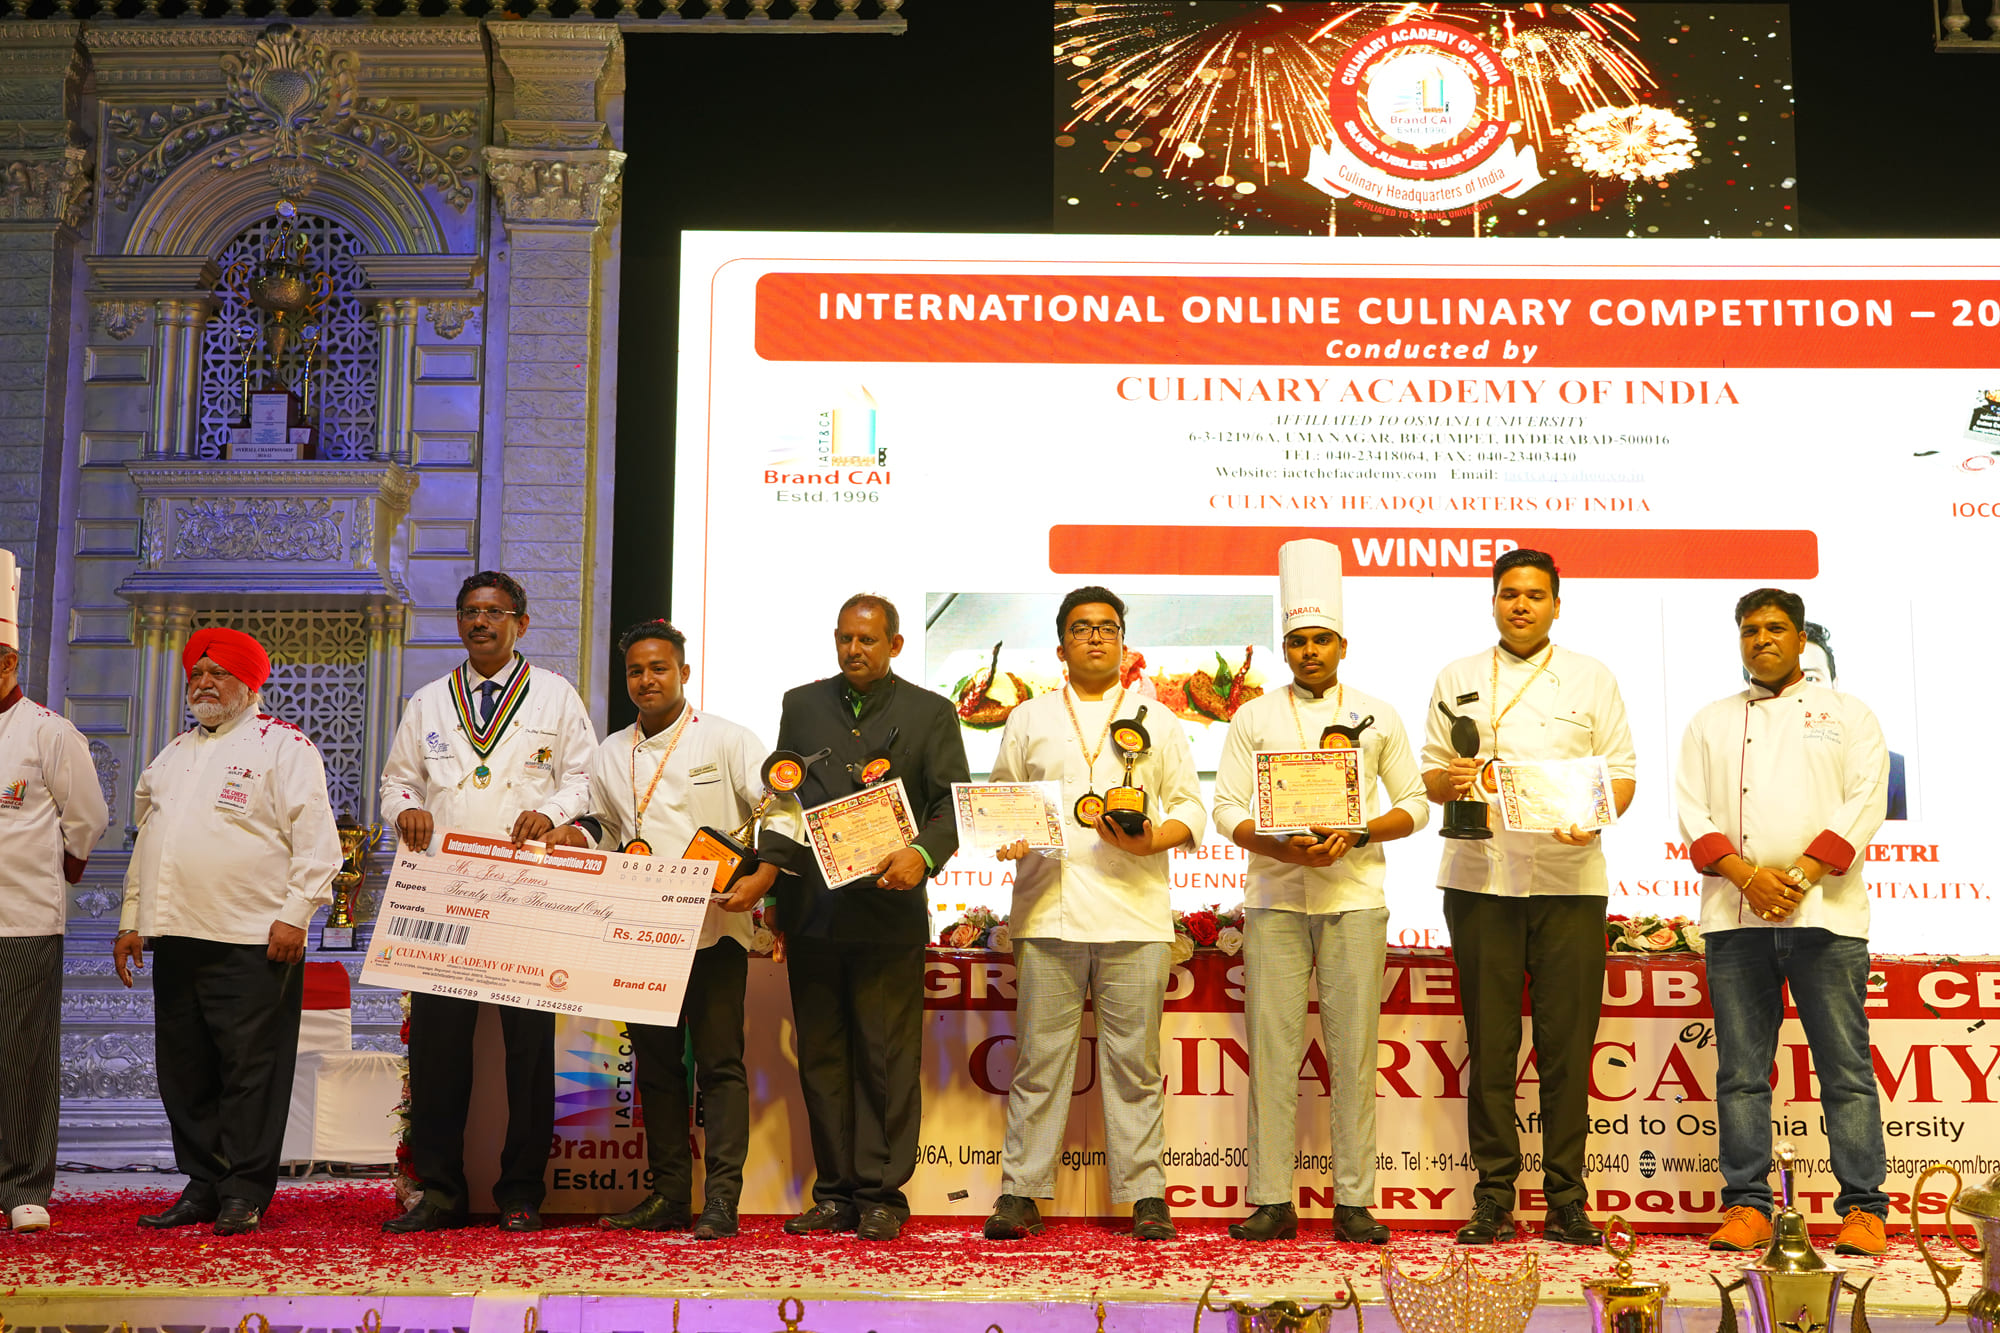 BRAND CAI SILVER JUBLIEE 1996 - 2020 CULINARY ACADEMY OF INDIA